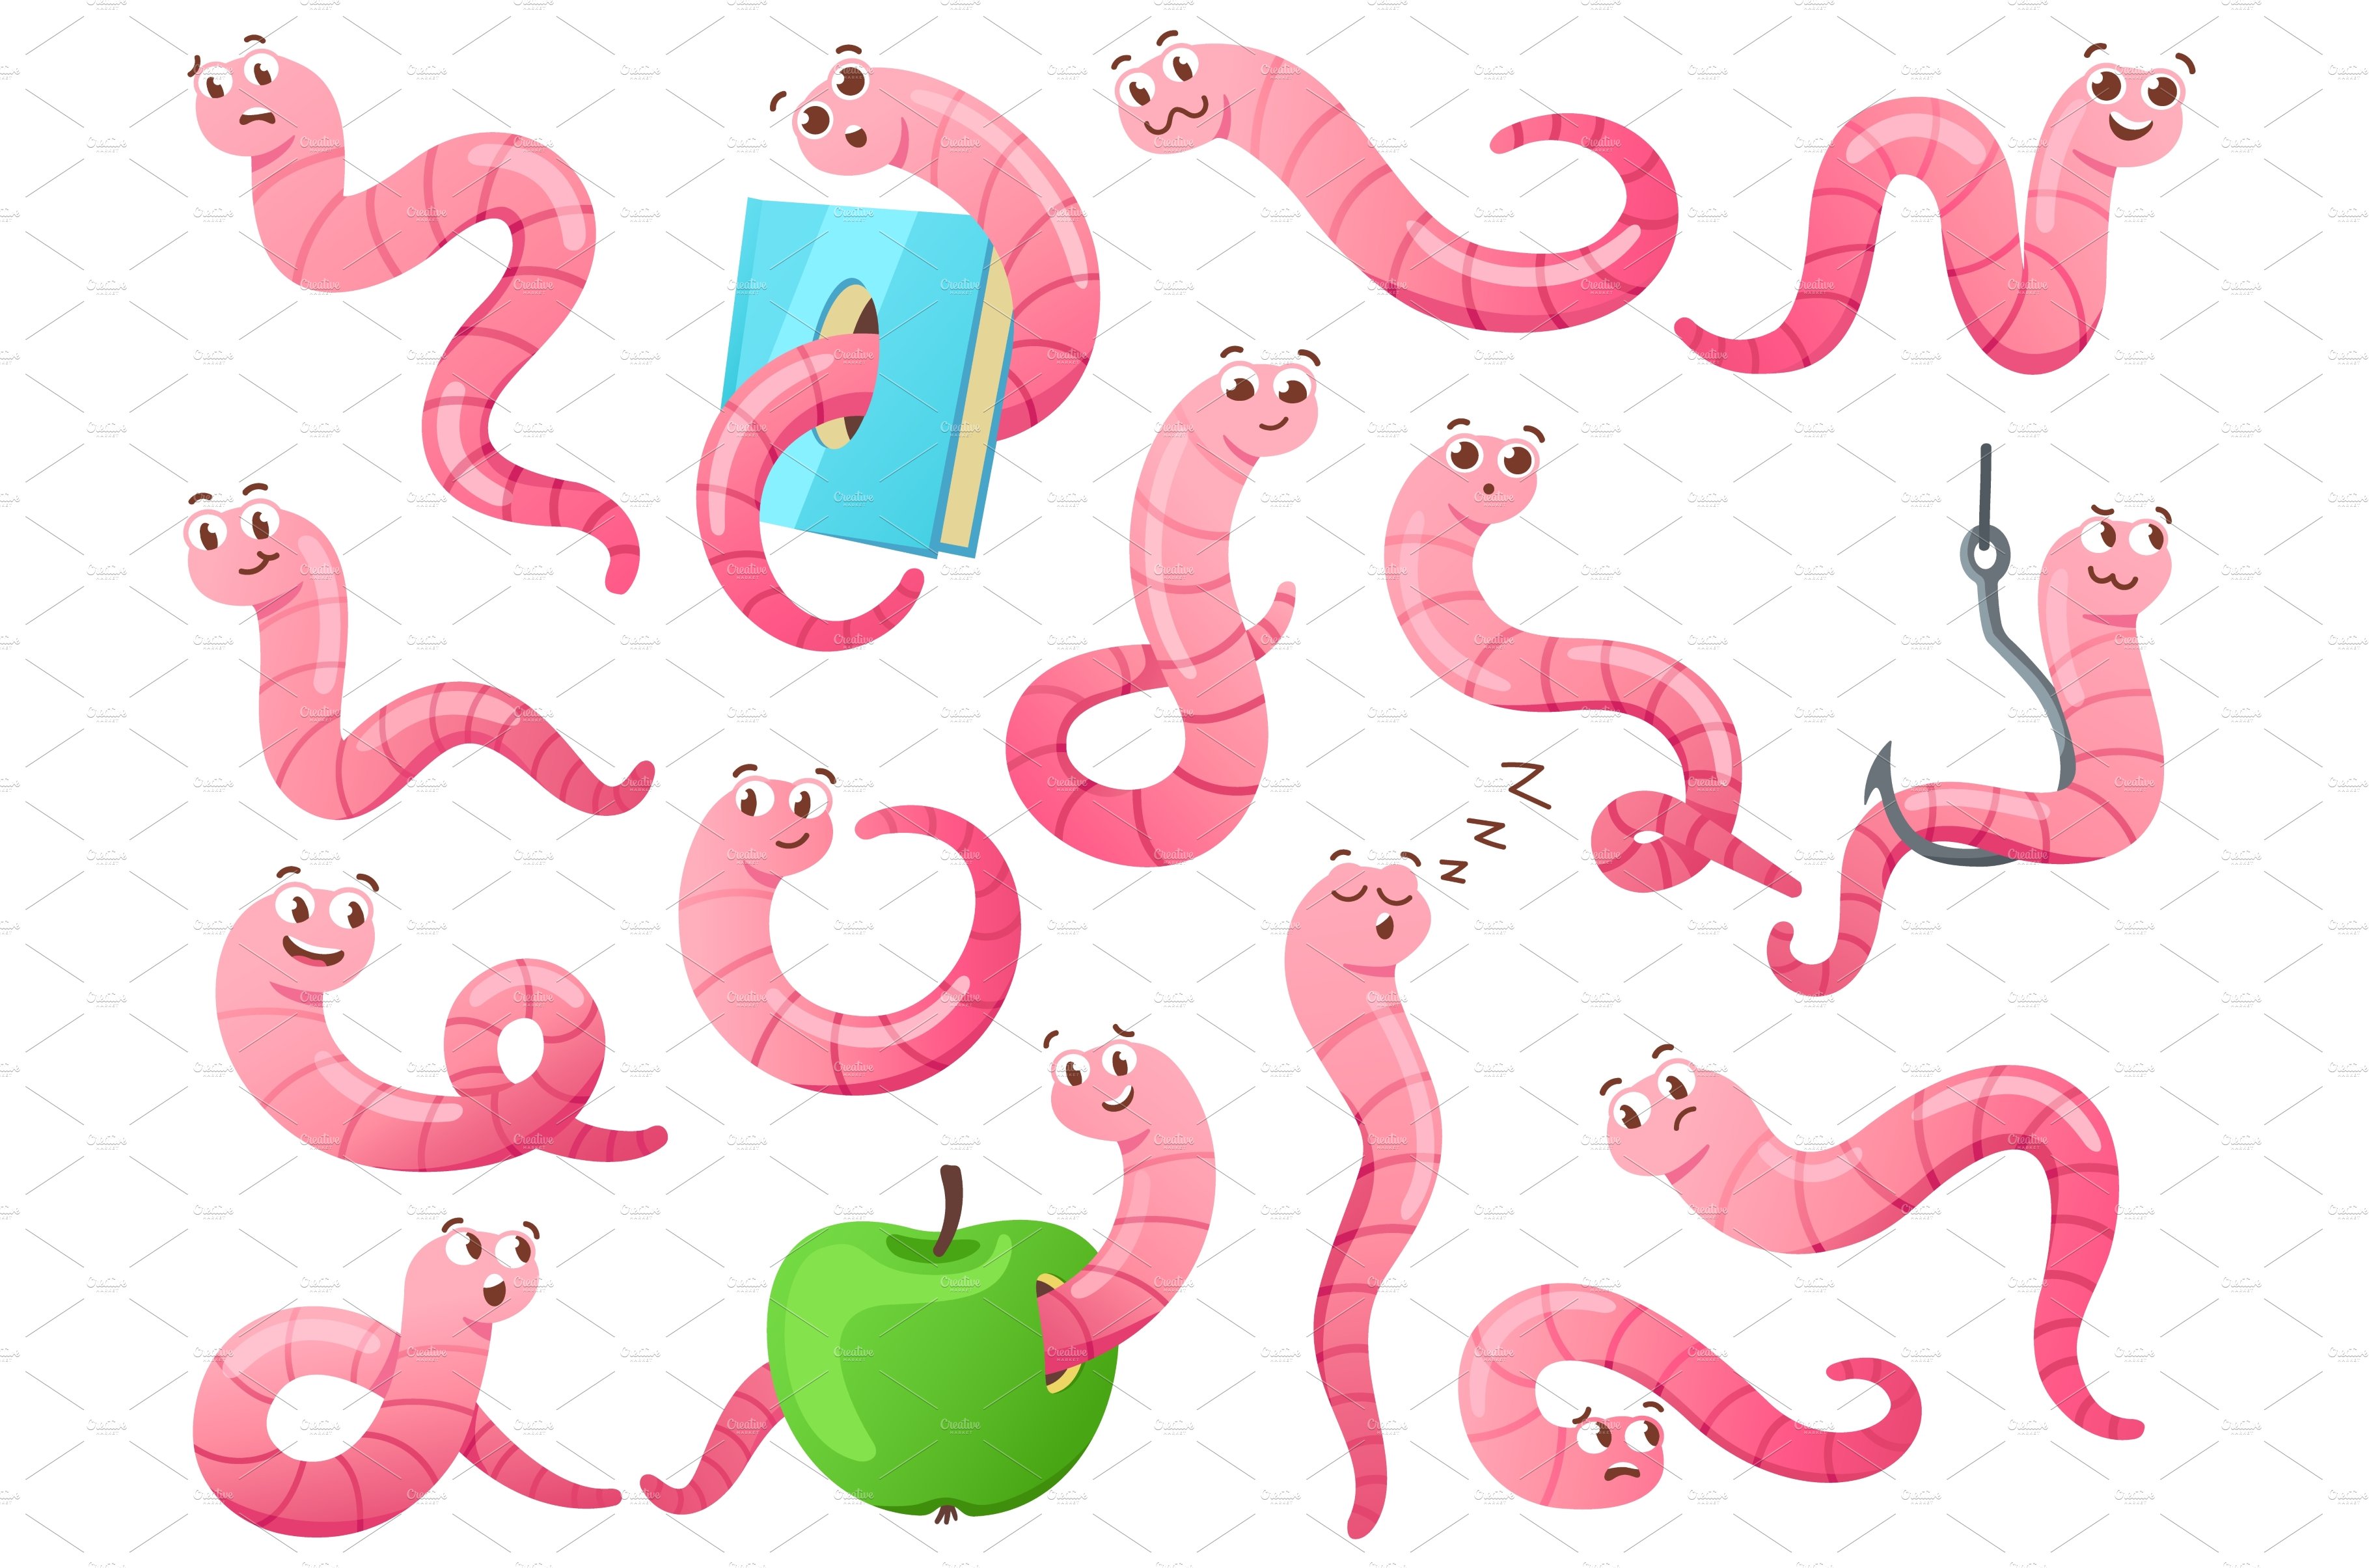 Cartoon worm in different poses cover image.